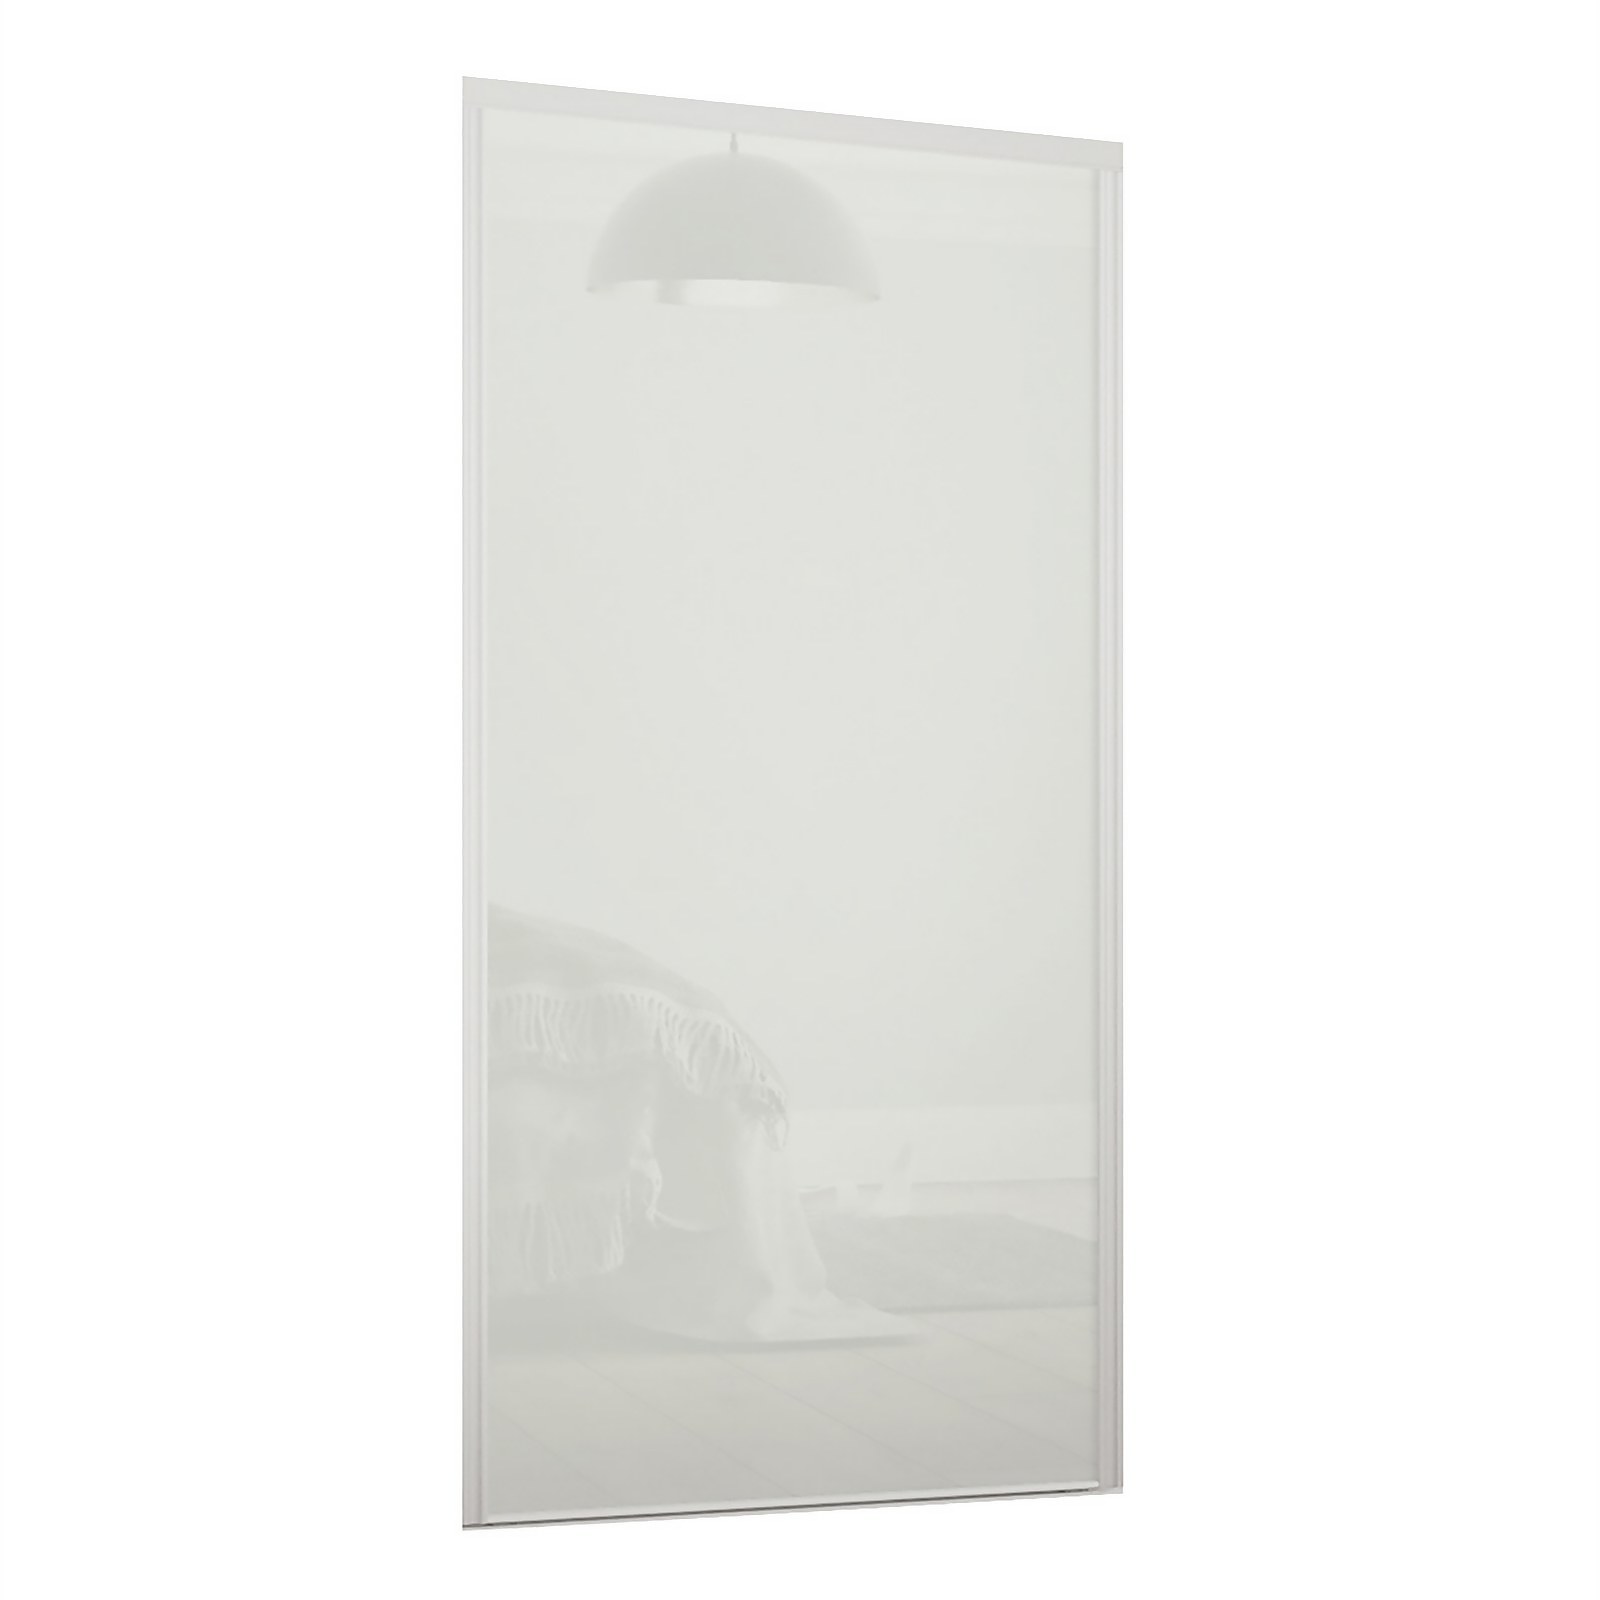 Photo of Loft Sliding Wardrobe Door Artic White Glass With Silver Frame -w-762mm